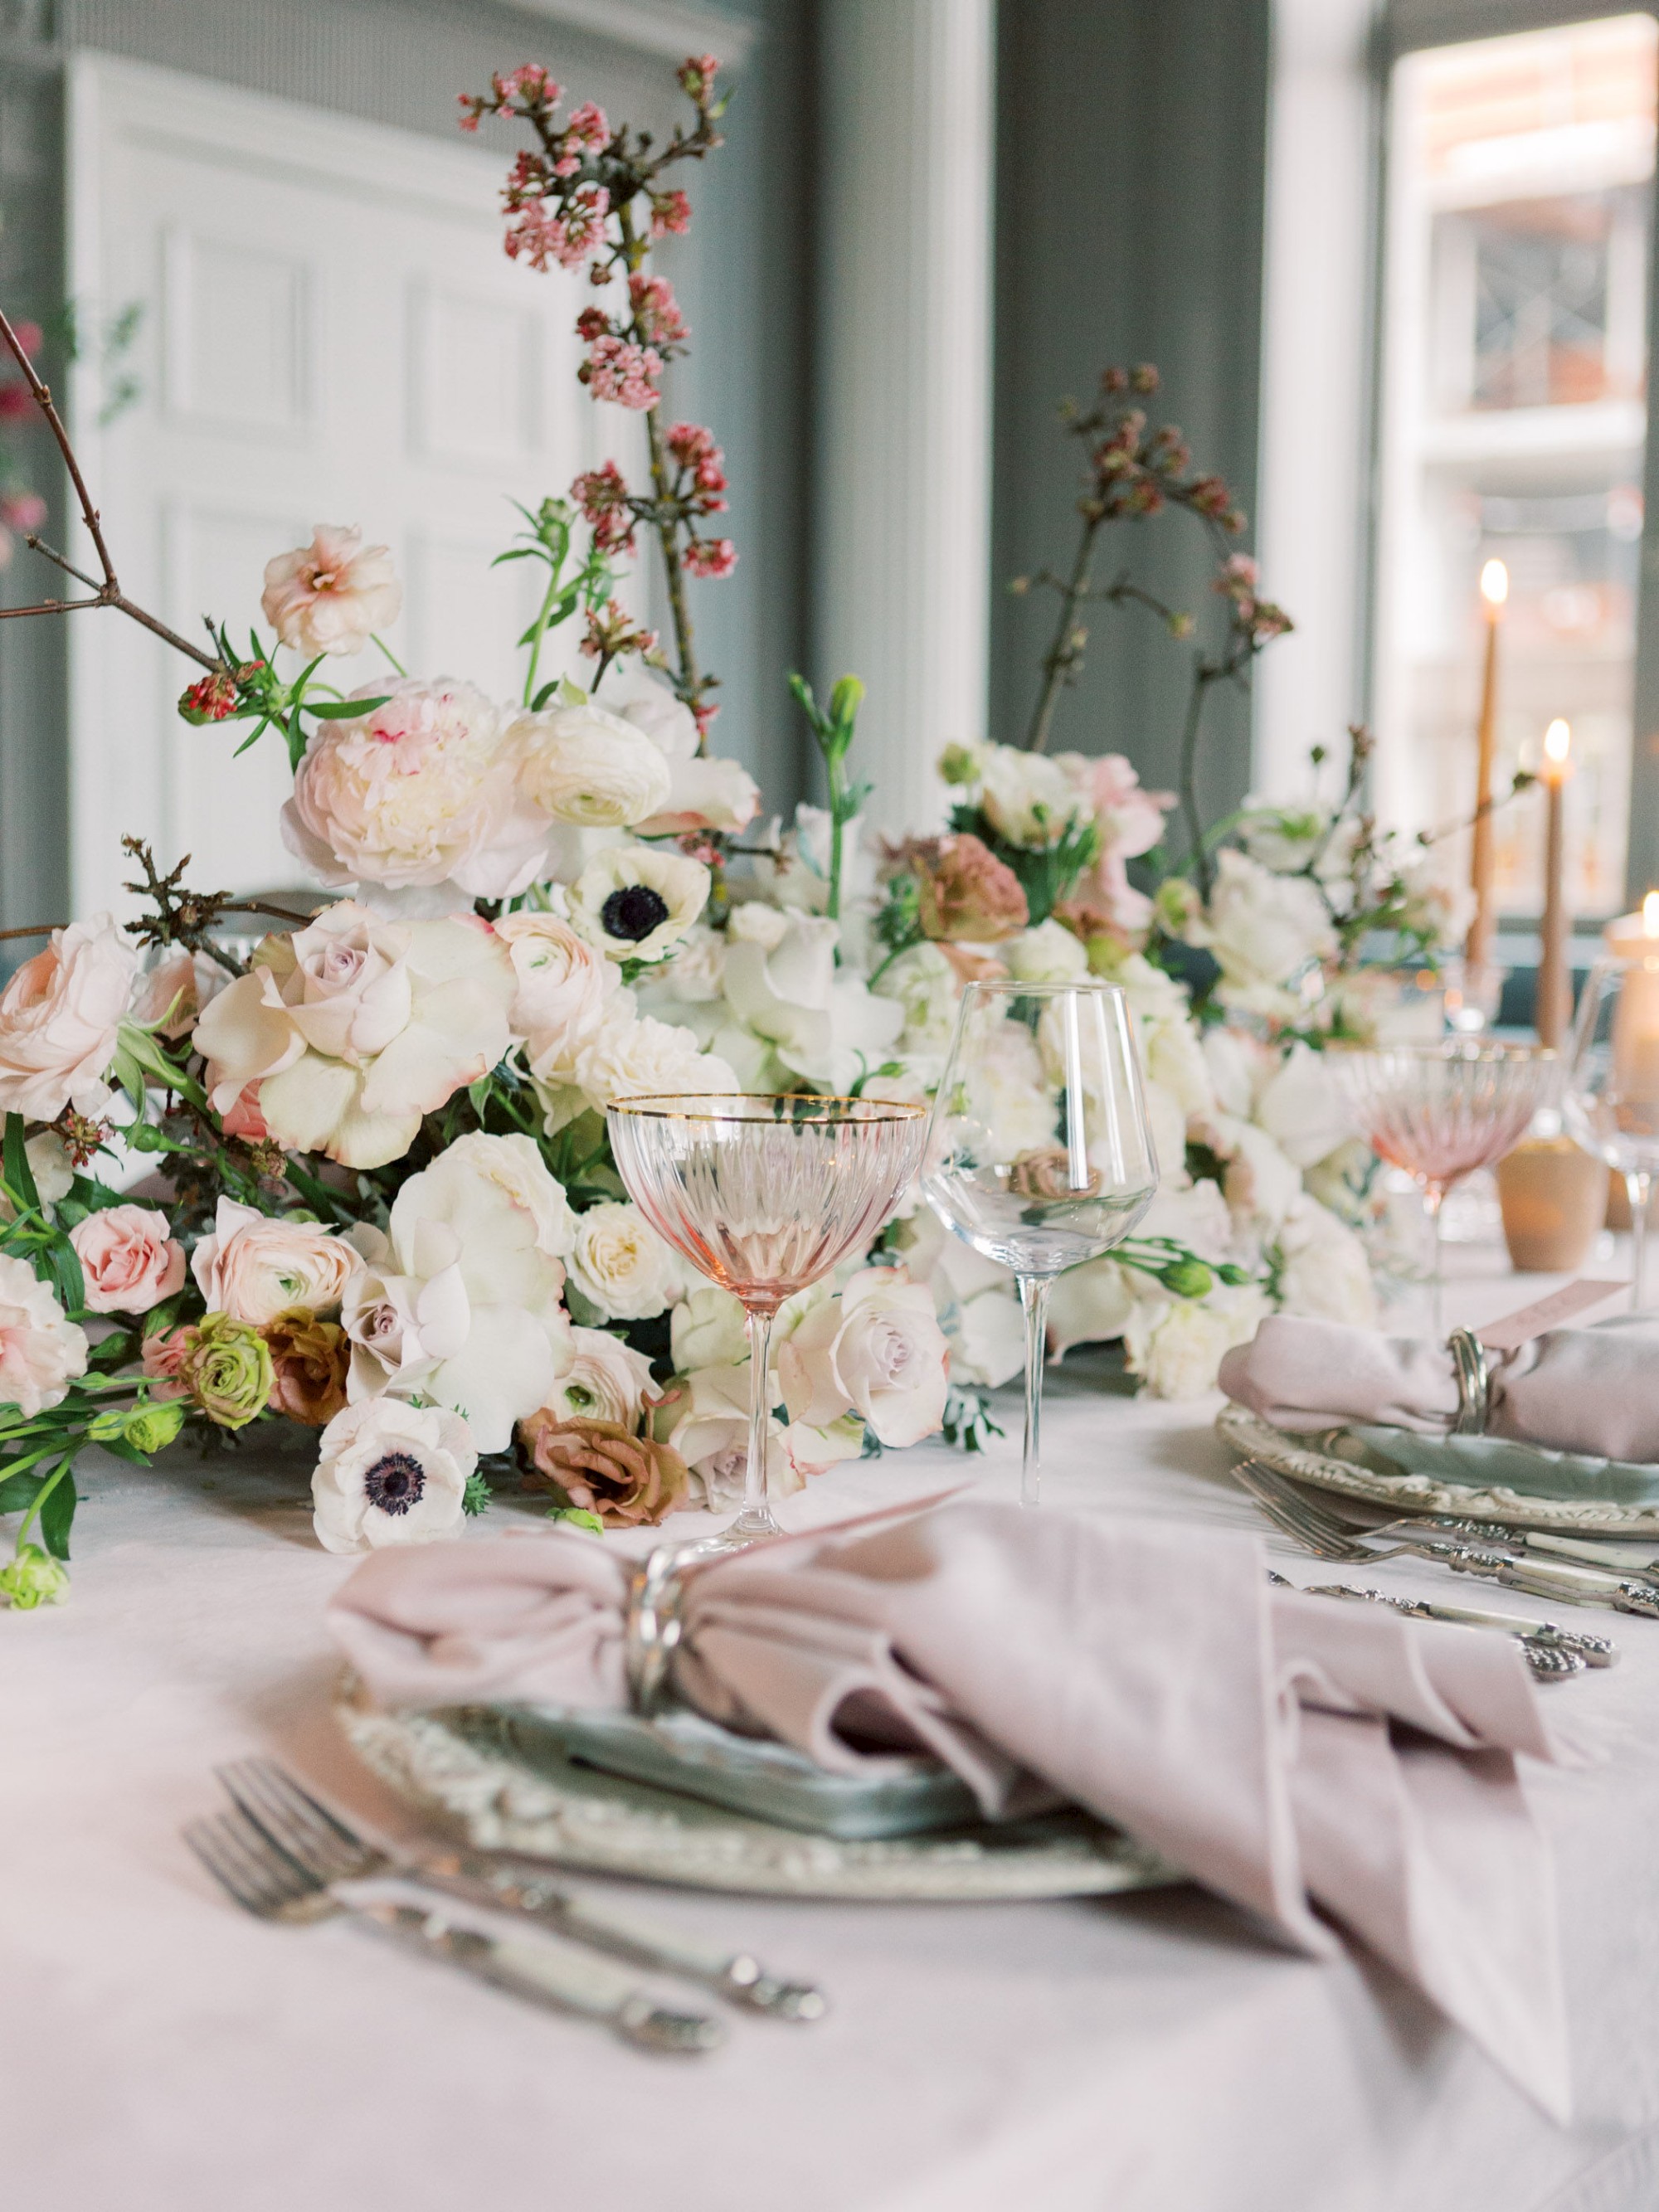 A beautifully decorated table setting with elegant floral arrangements, plates, cutlery, and wine glasses, ready for a formal dining occasion.